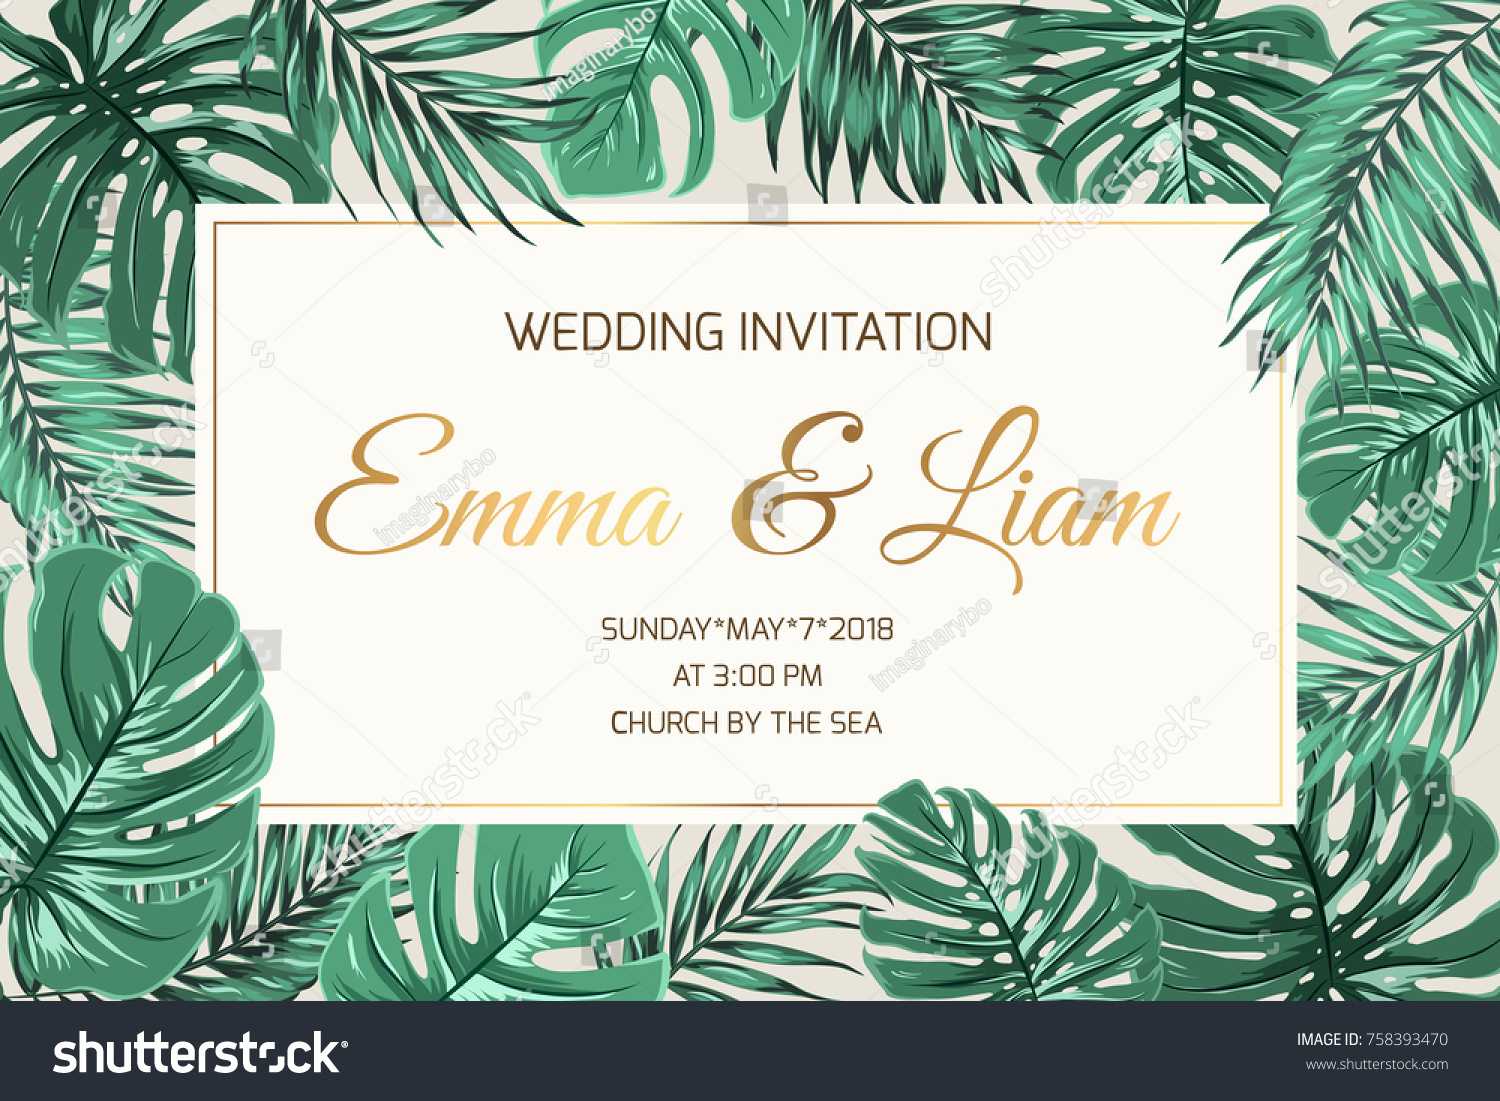 Wedding Marriage Event Invitation Card Template Stock Vector Pertaining To Event Invitation Card Template